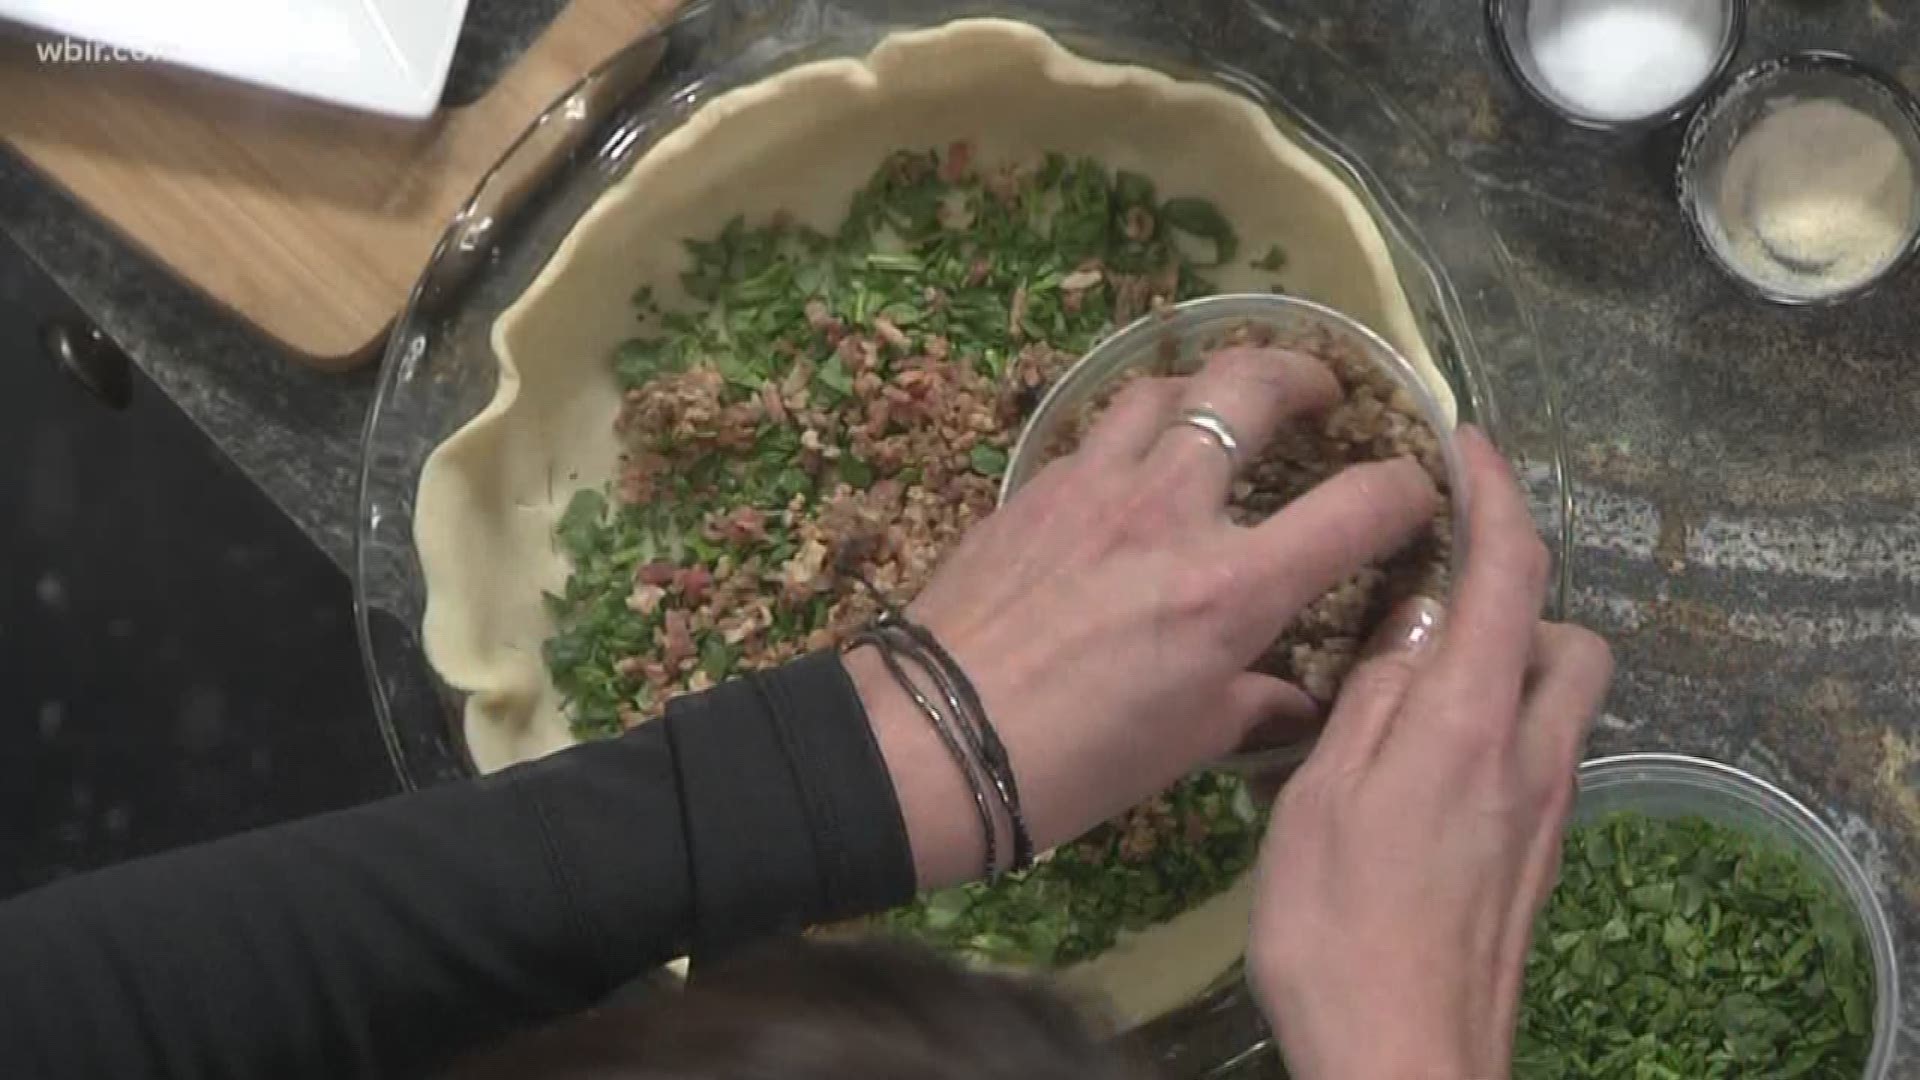 Buffalo Mountain Grille shares a personal recipe for a family quiche, perfect for Easter get-togethers.